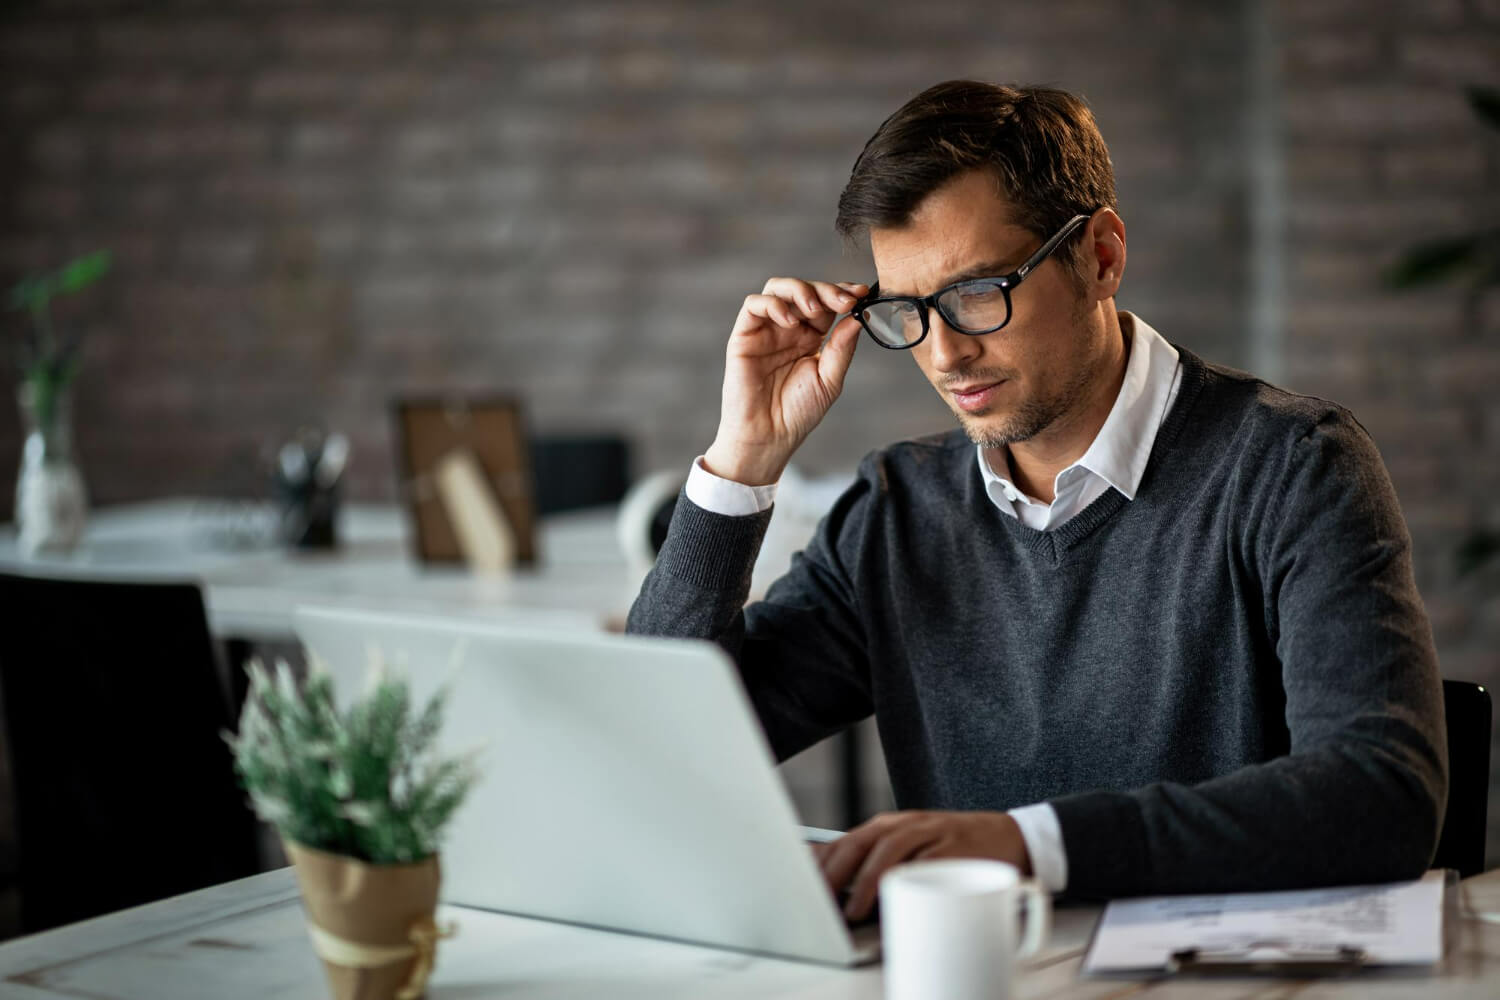 Man in glasses thinking while looking at laptop